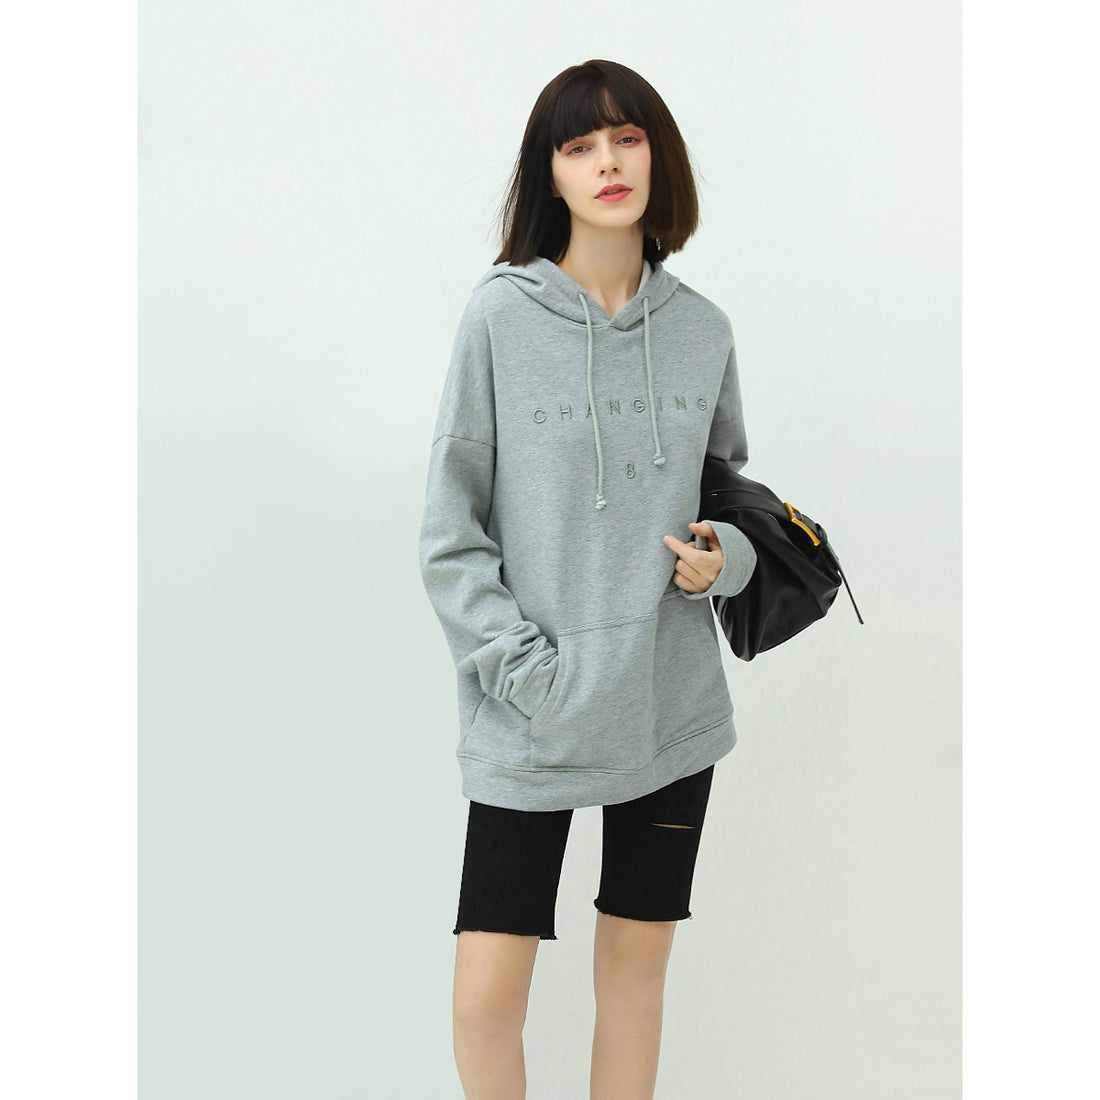 relaxed-fit-grey-hooded-sweater-with-slogan_all_grey_1.jpg